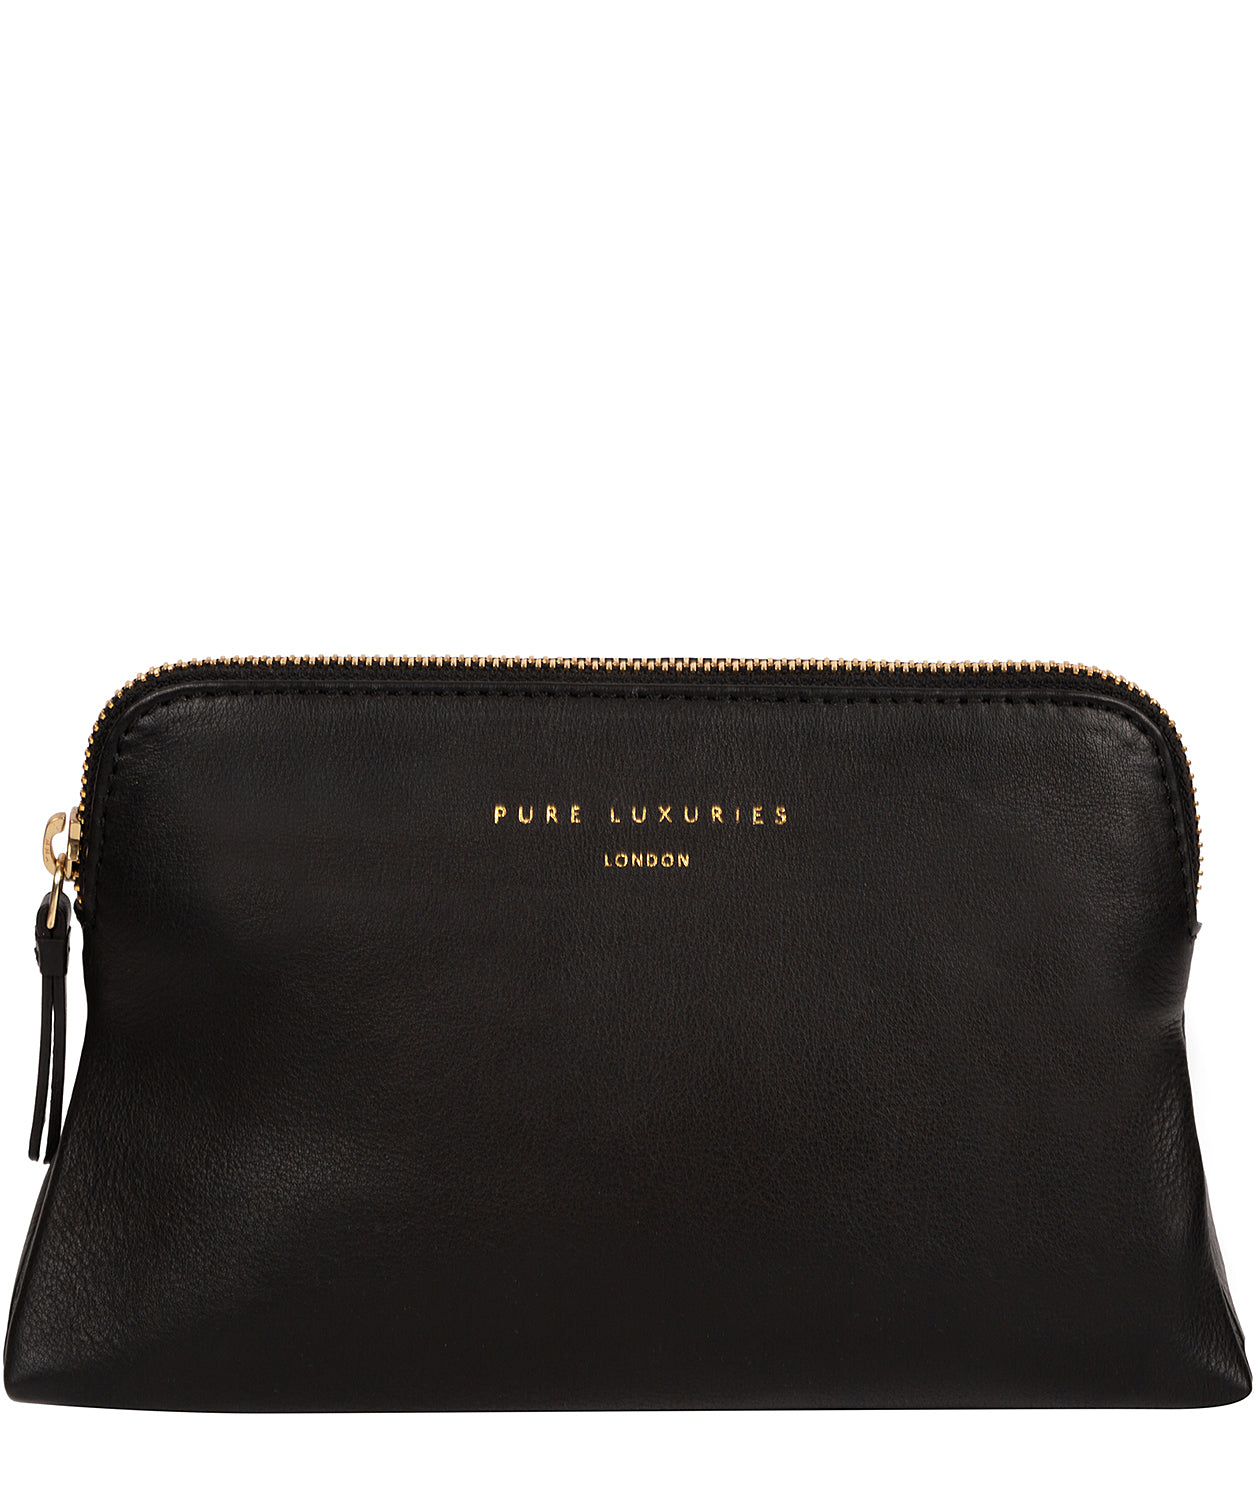 Black Leather Make-up Bag 'Plaistow' by Pure Luxuries – Pure Luxuries ...